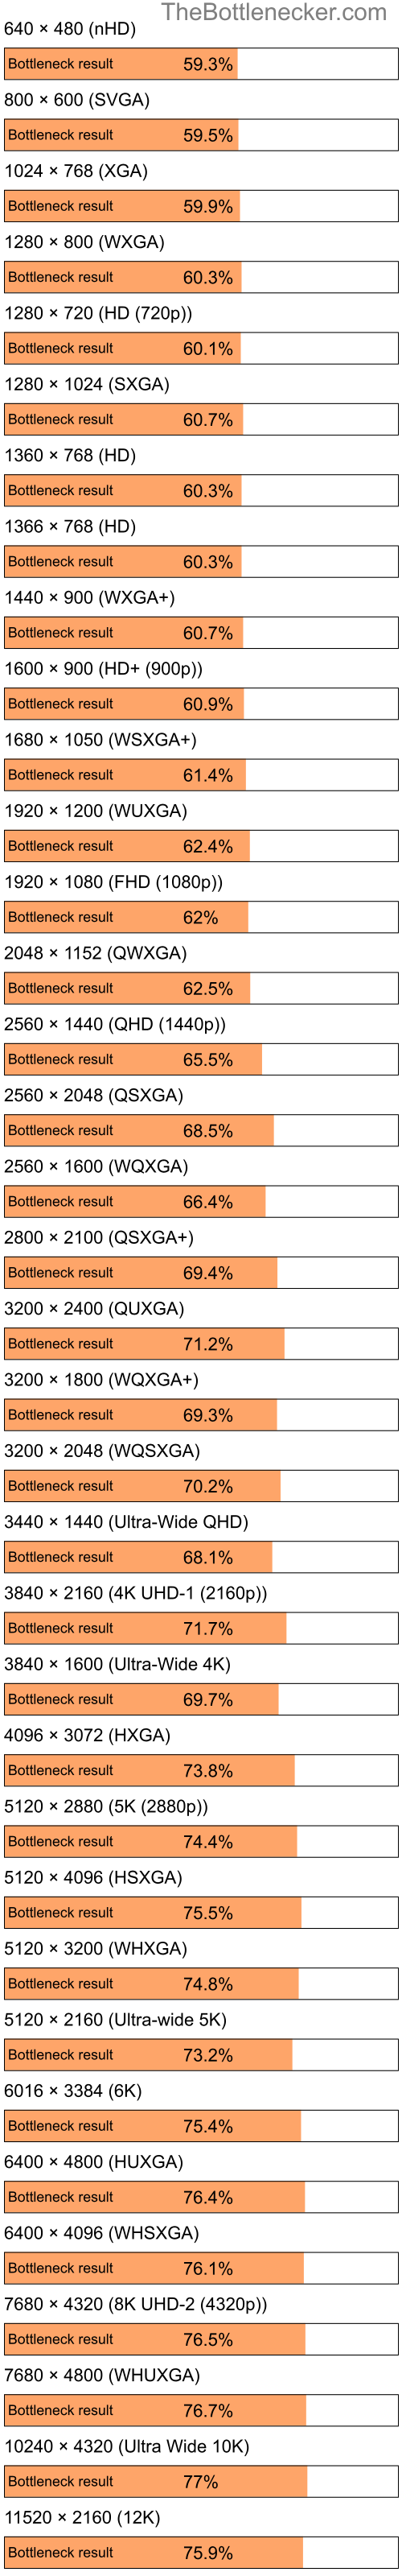 Bottleneck results by resolution for Intel Pentium 4 and NVIDIA Quadro FX 3400 in General Tasks